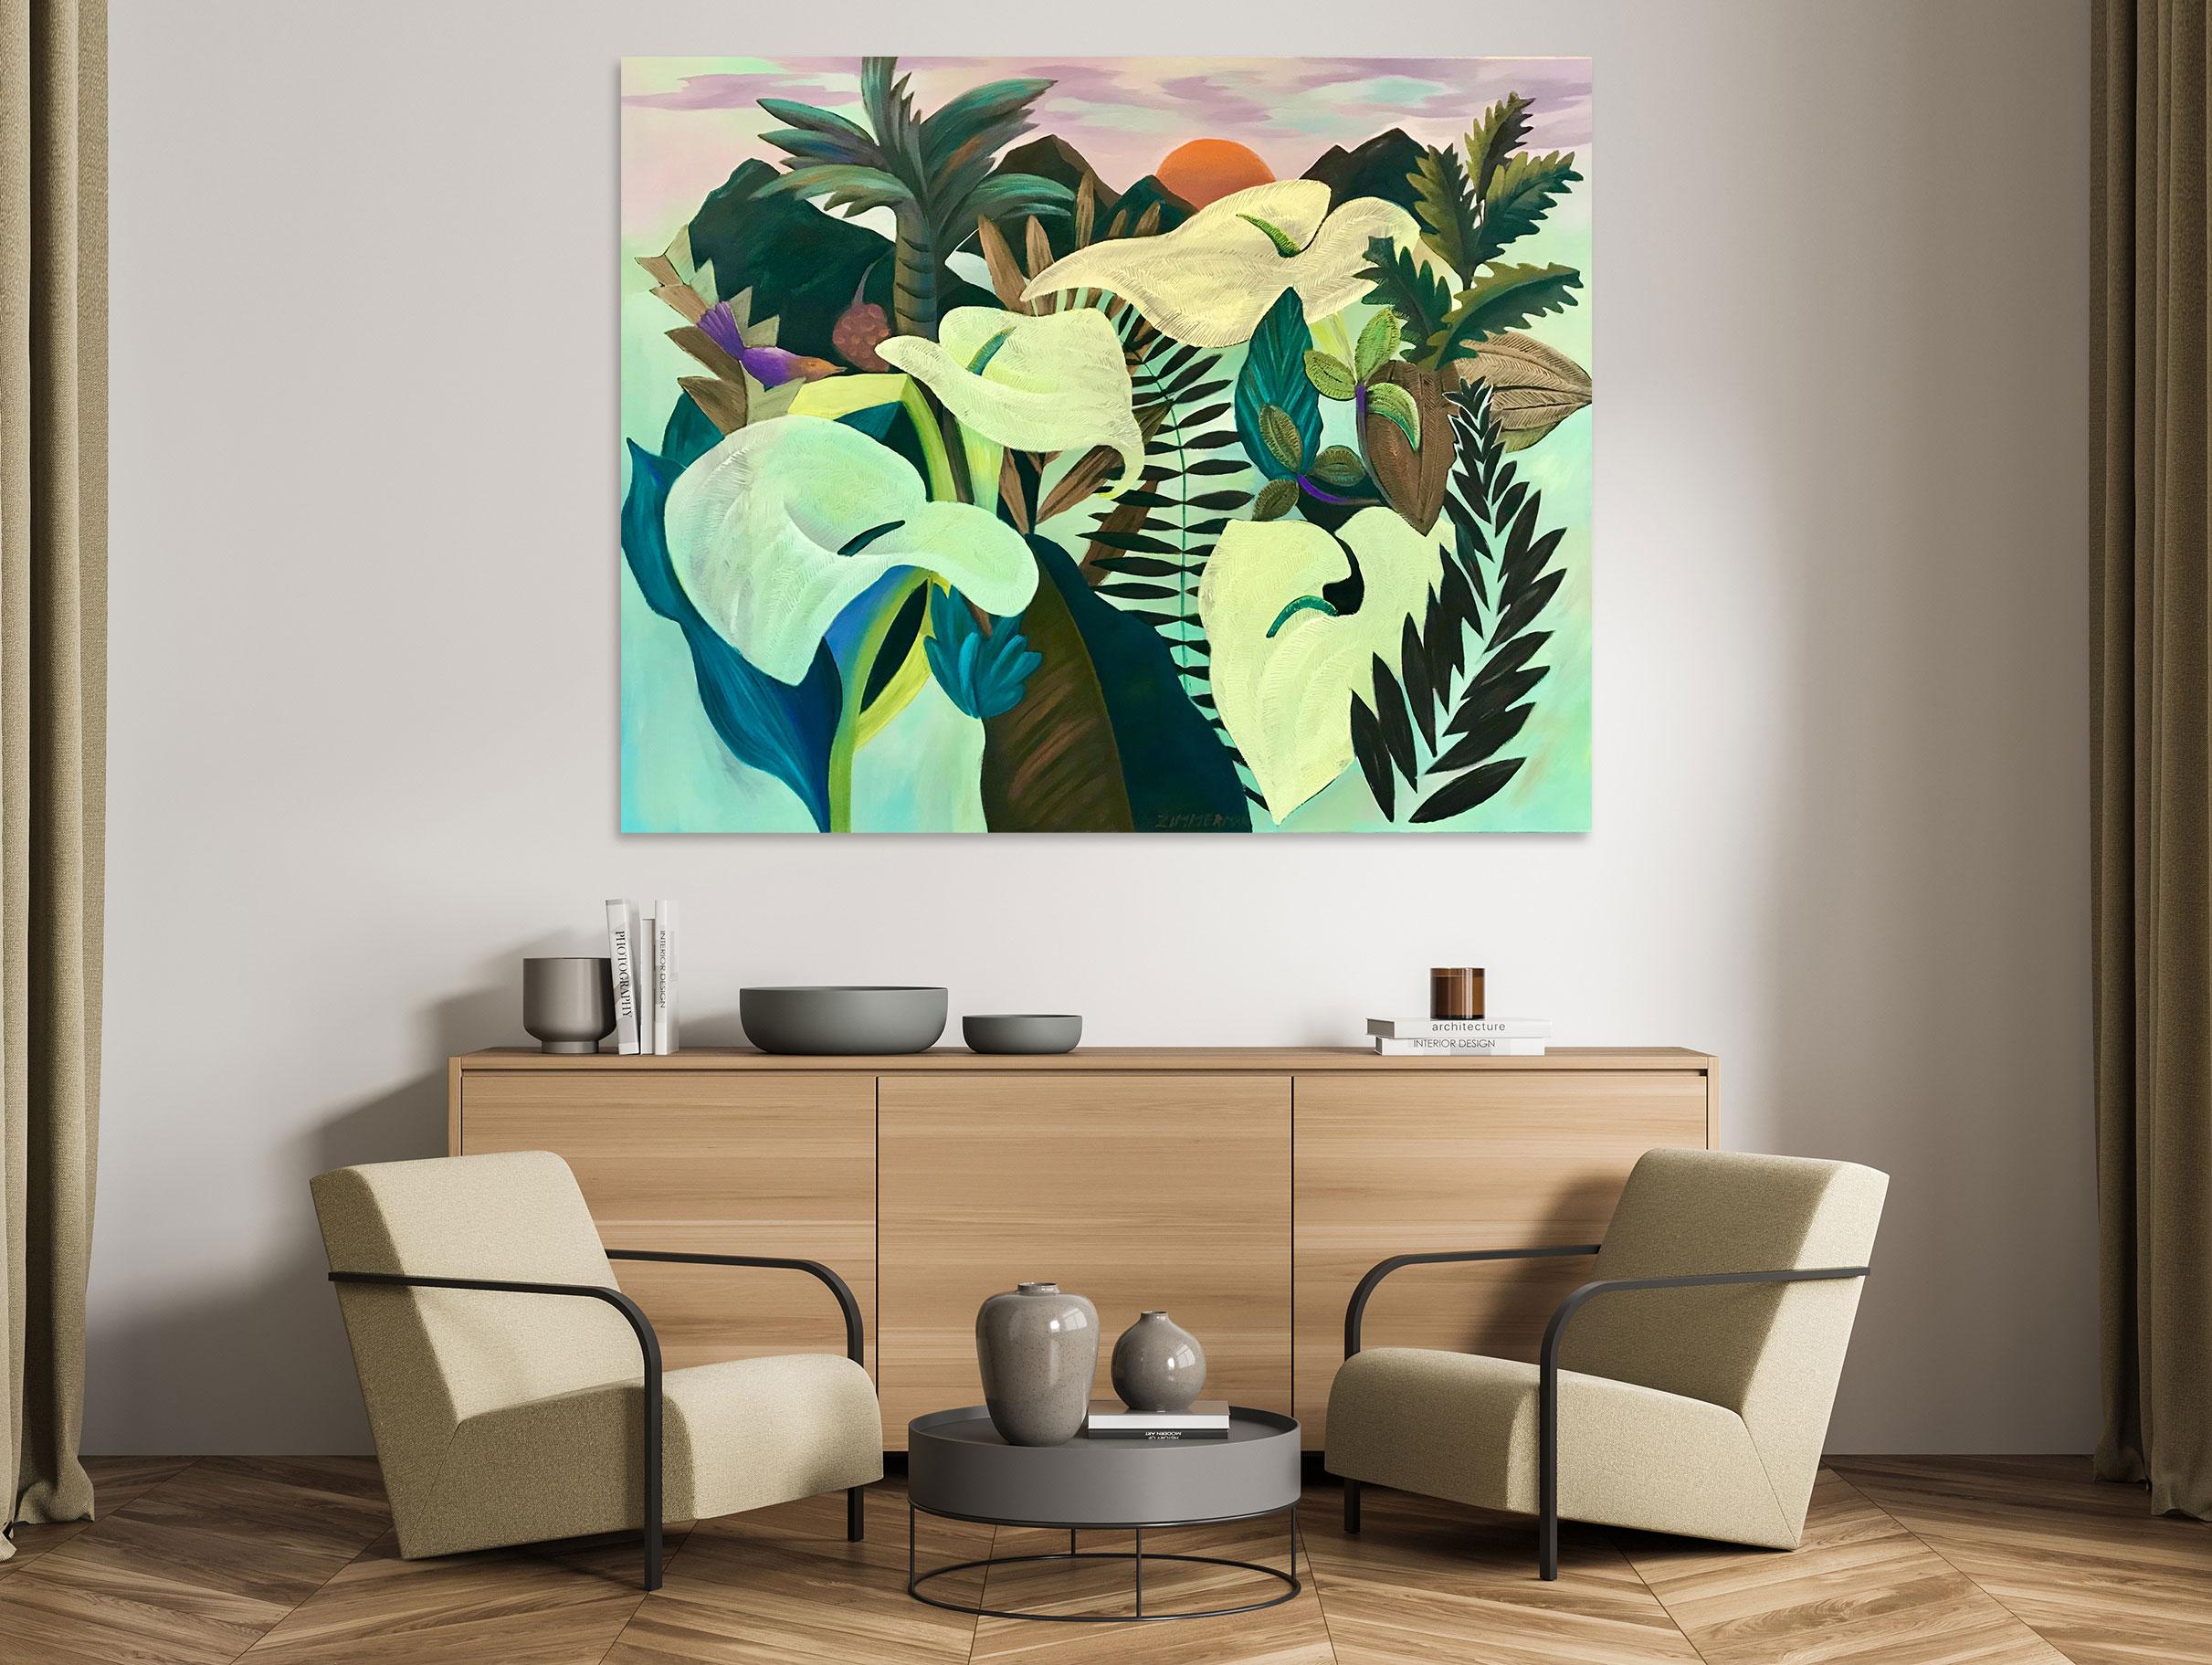 Big Lilies - Landscape Painting - Oil on Canvas By Marc Zimmerman For Sale 1